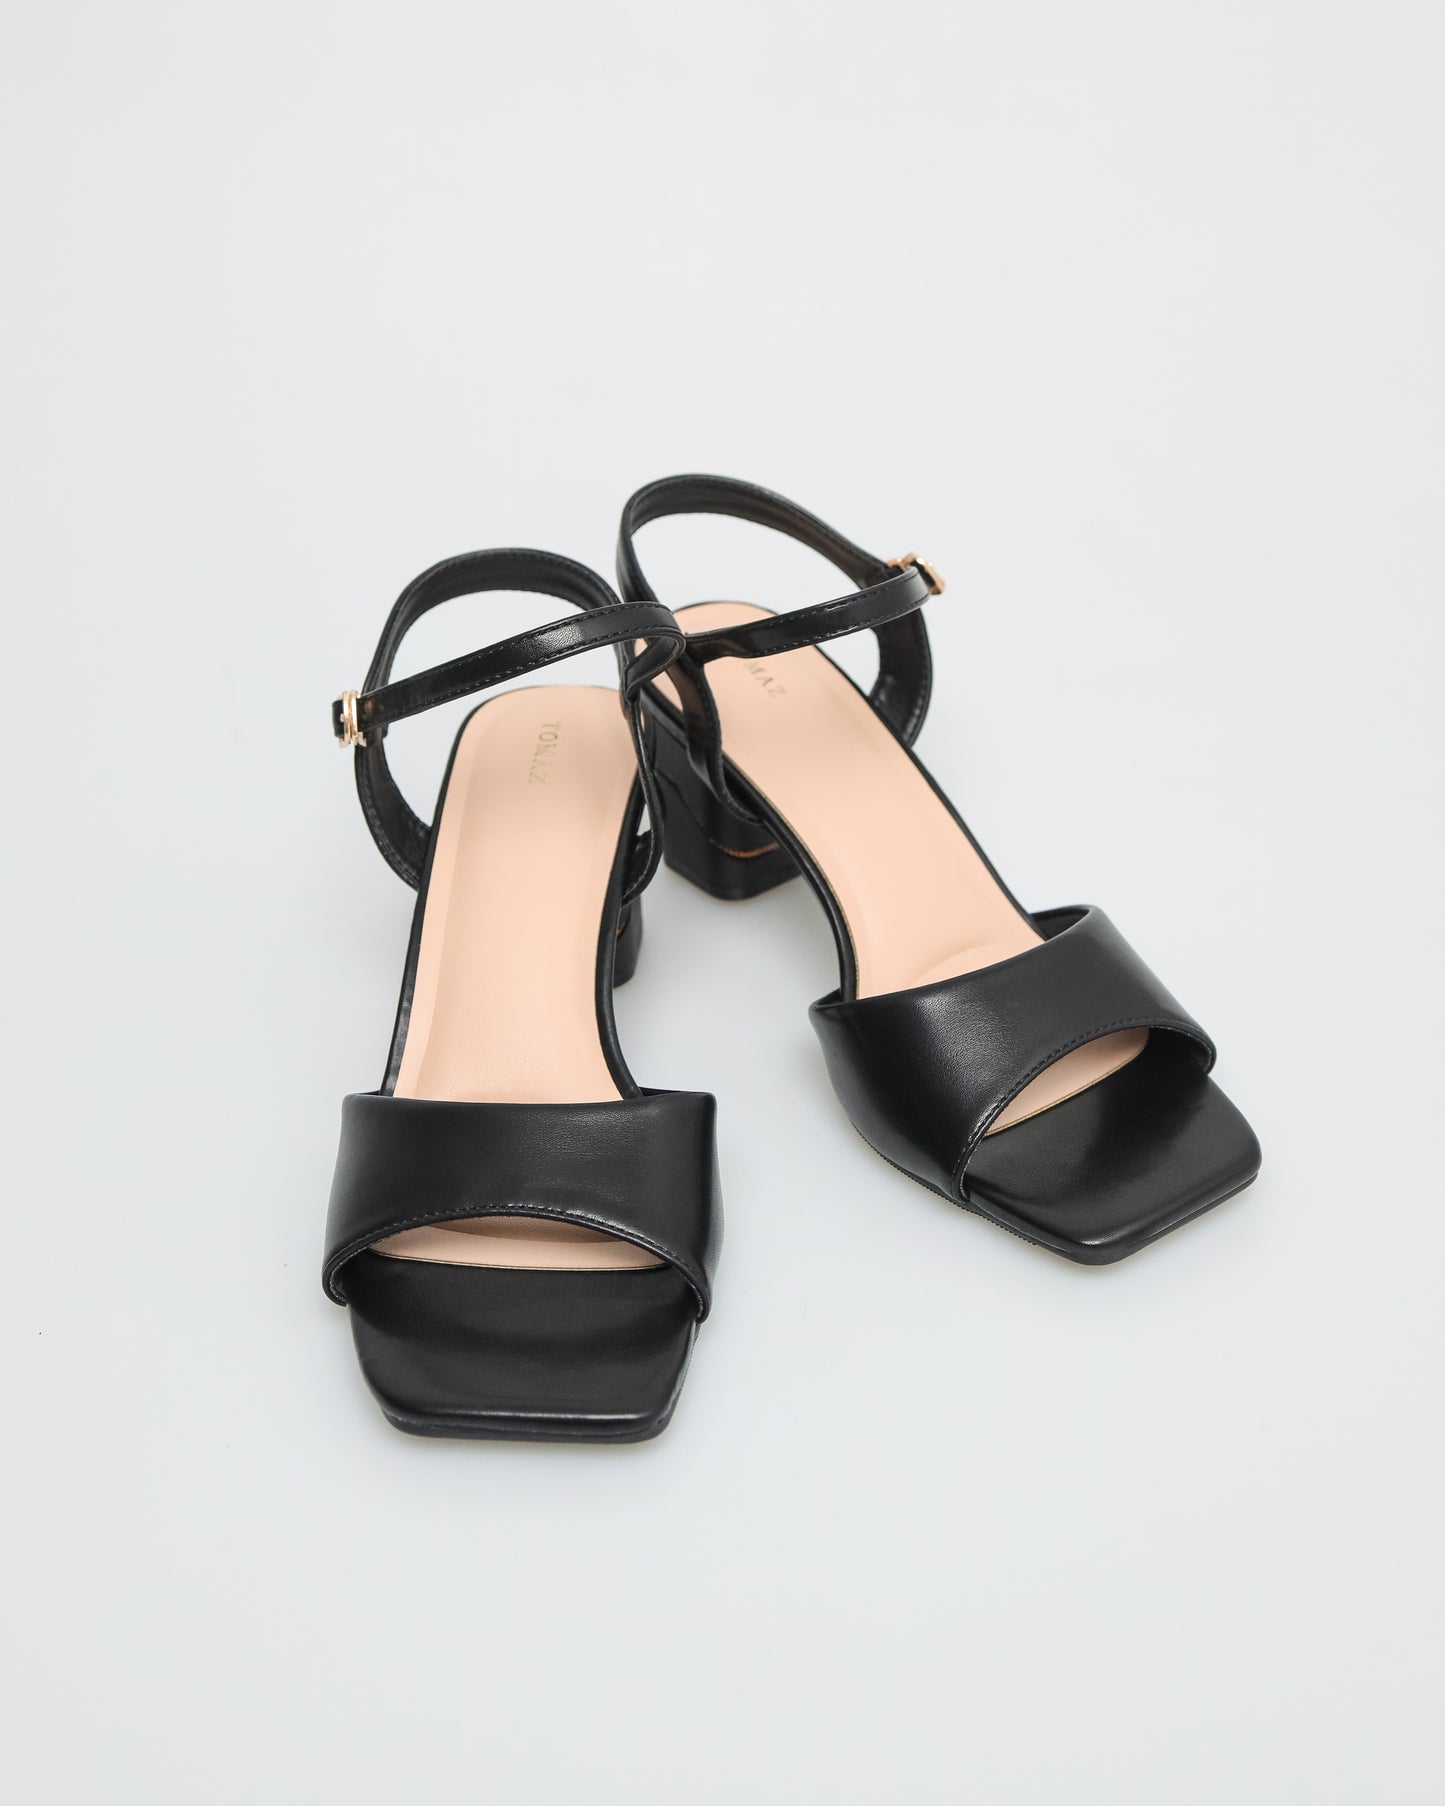 Tomaz NN267 Ladies Open Toe with Strap Chained-Block Heels (Black)